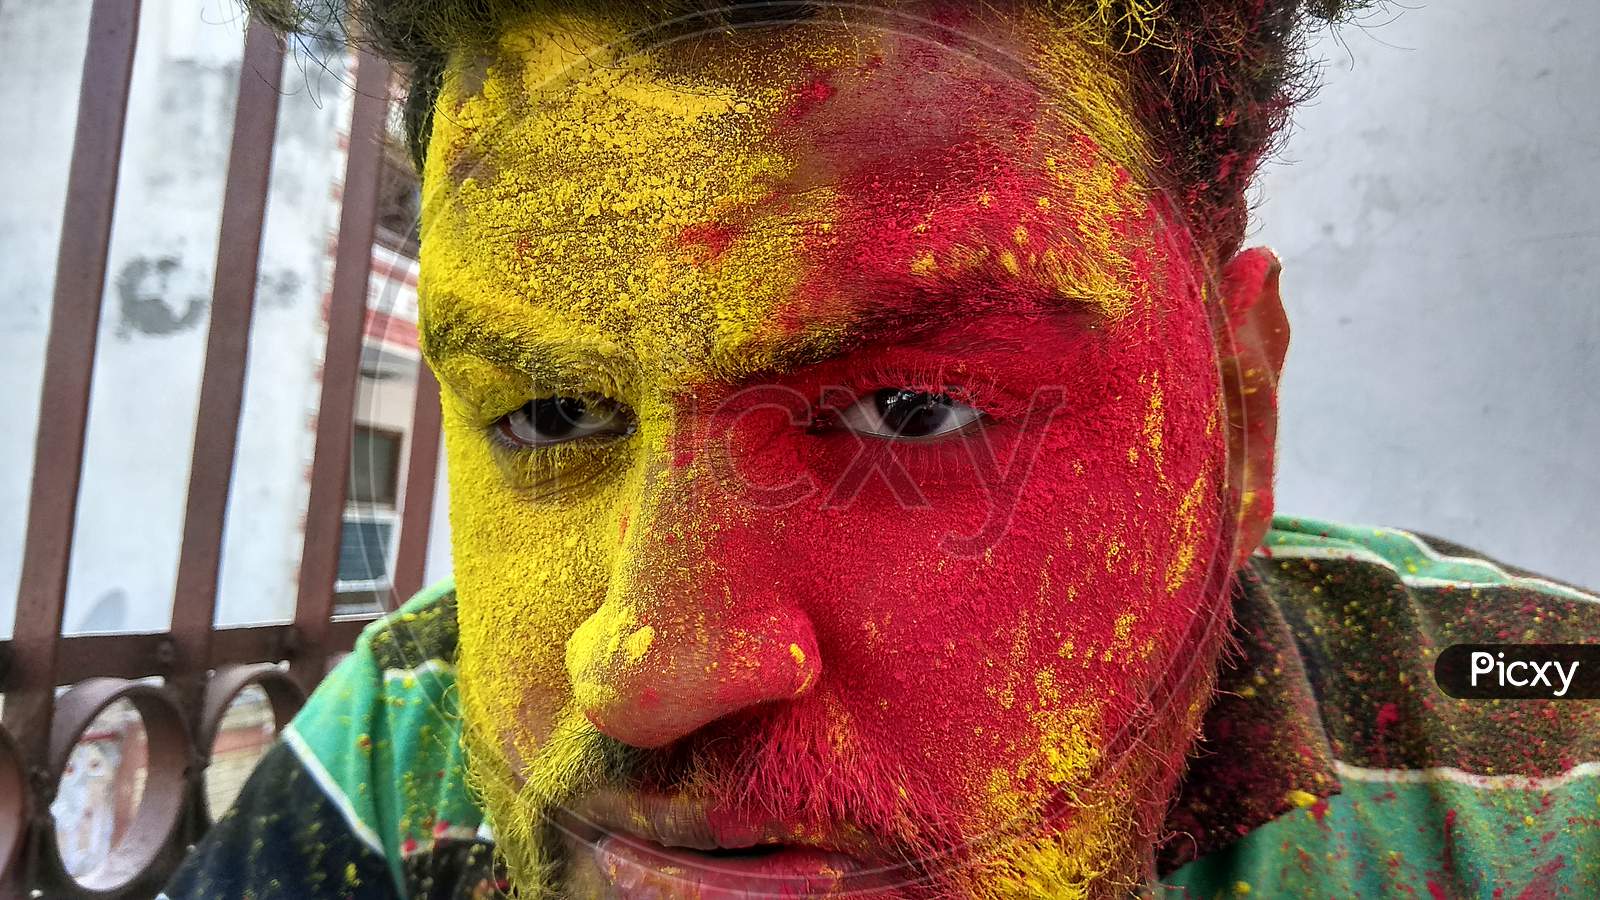 Holi (A Festival of Hindu Religion in India) also called Festival of color